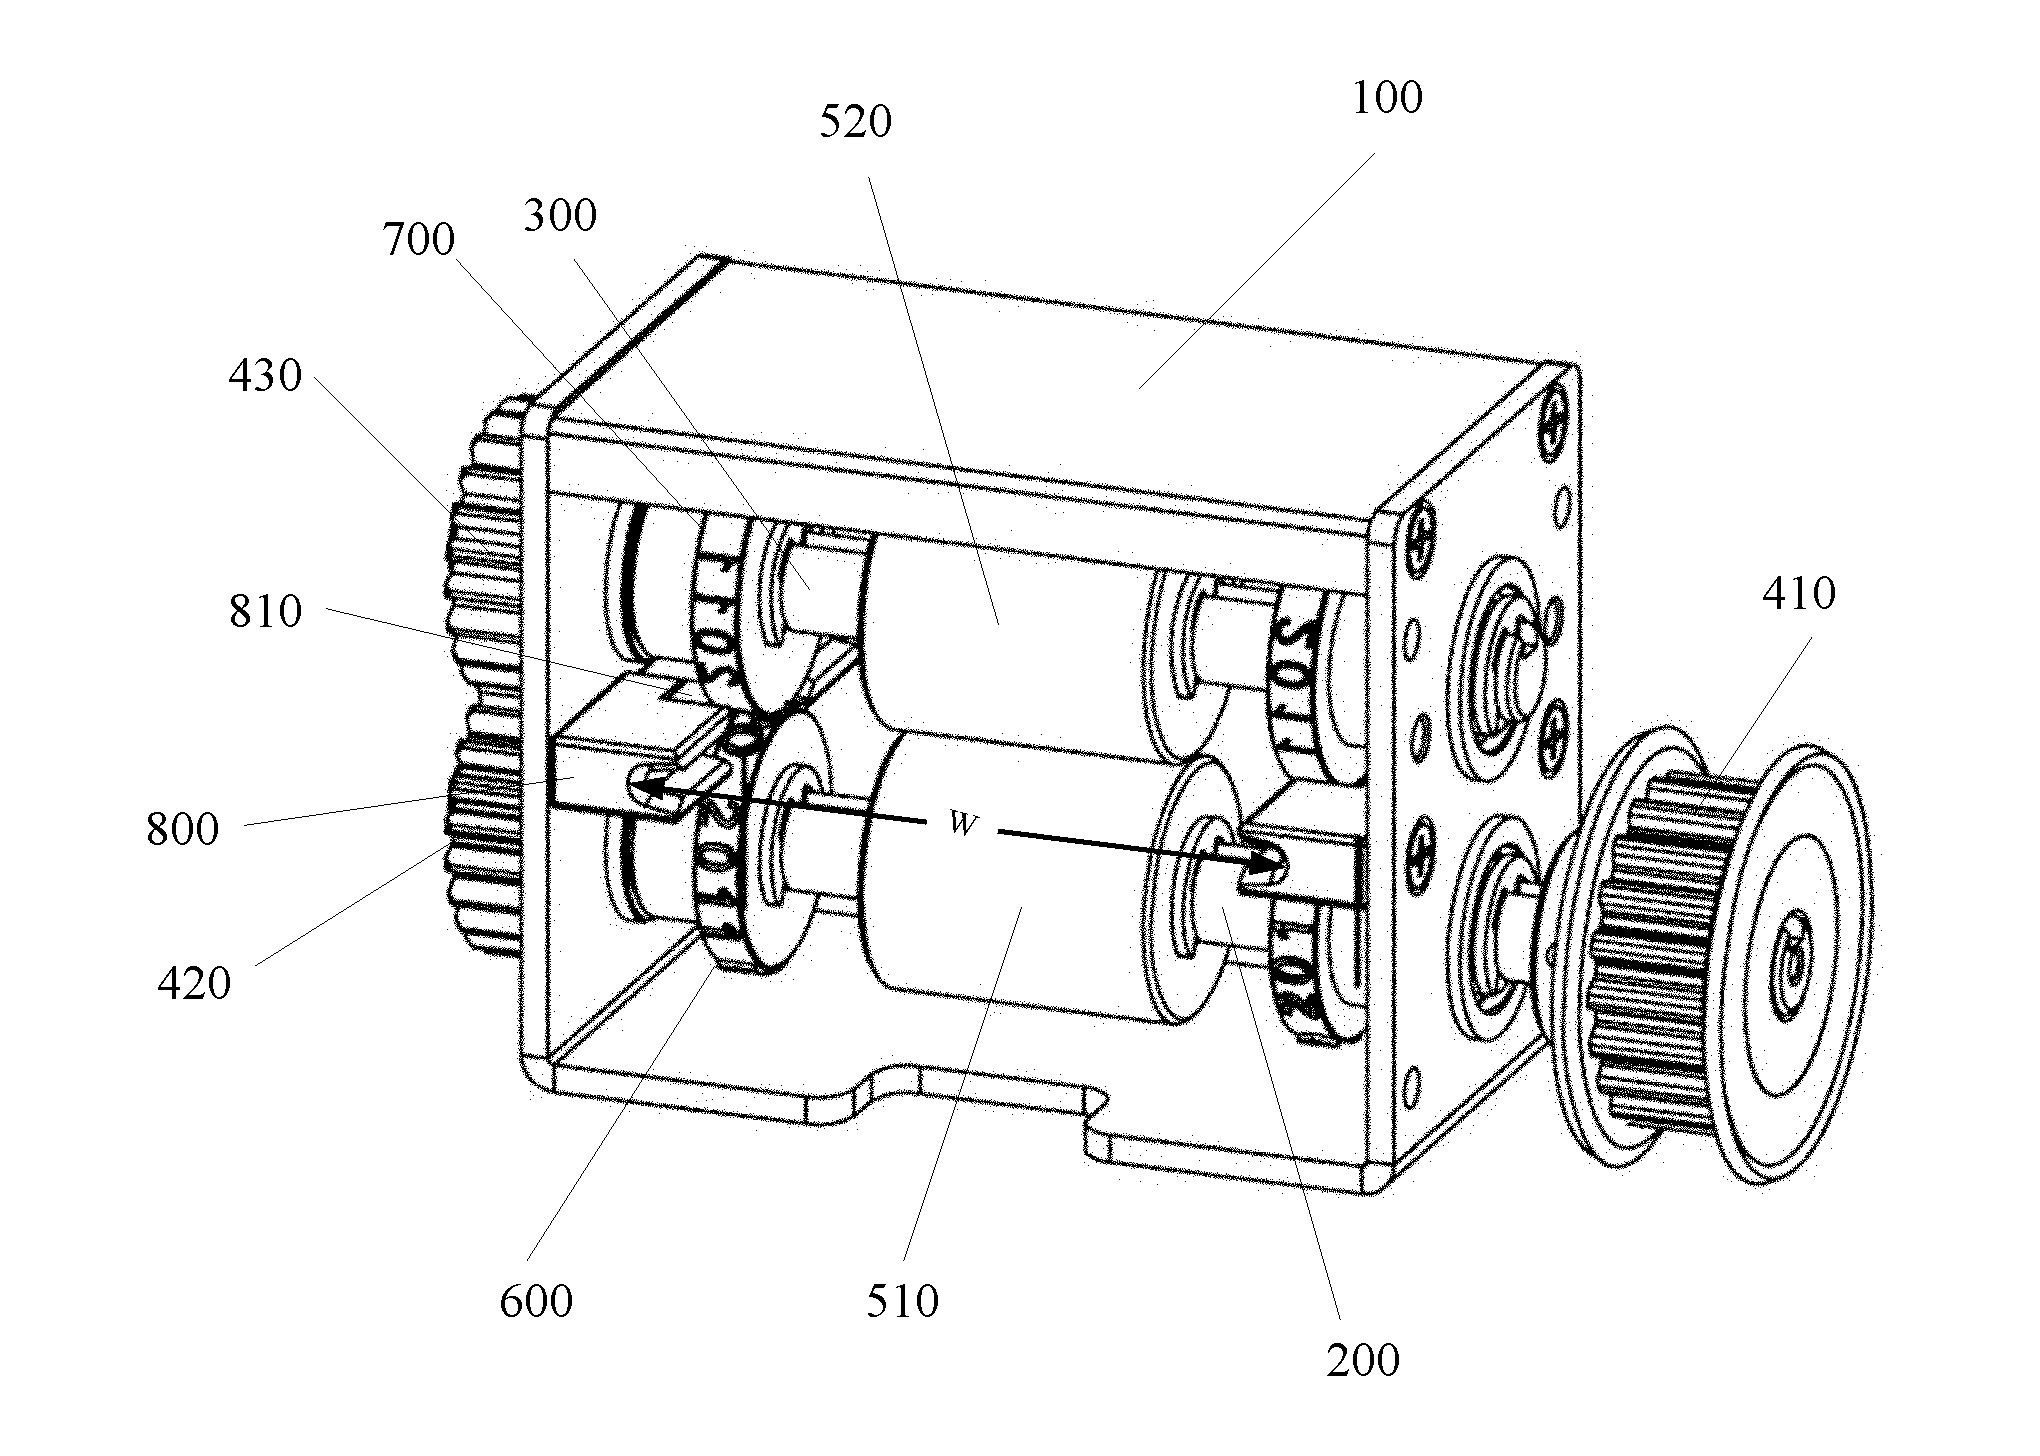 Automatic ticket feeding and discharging mechanism